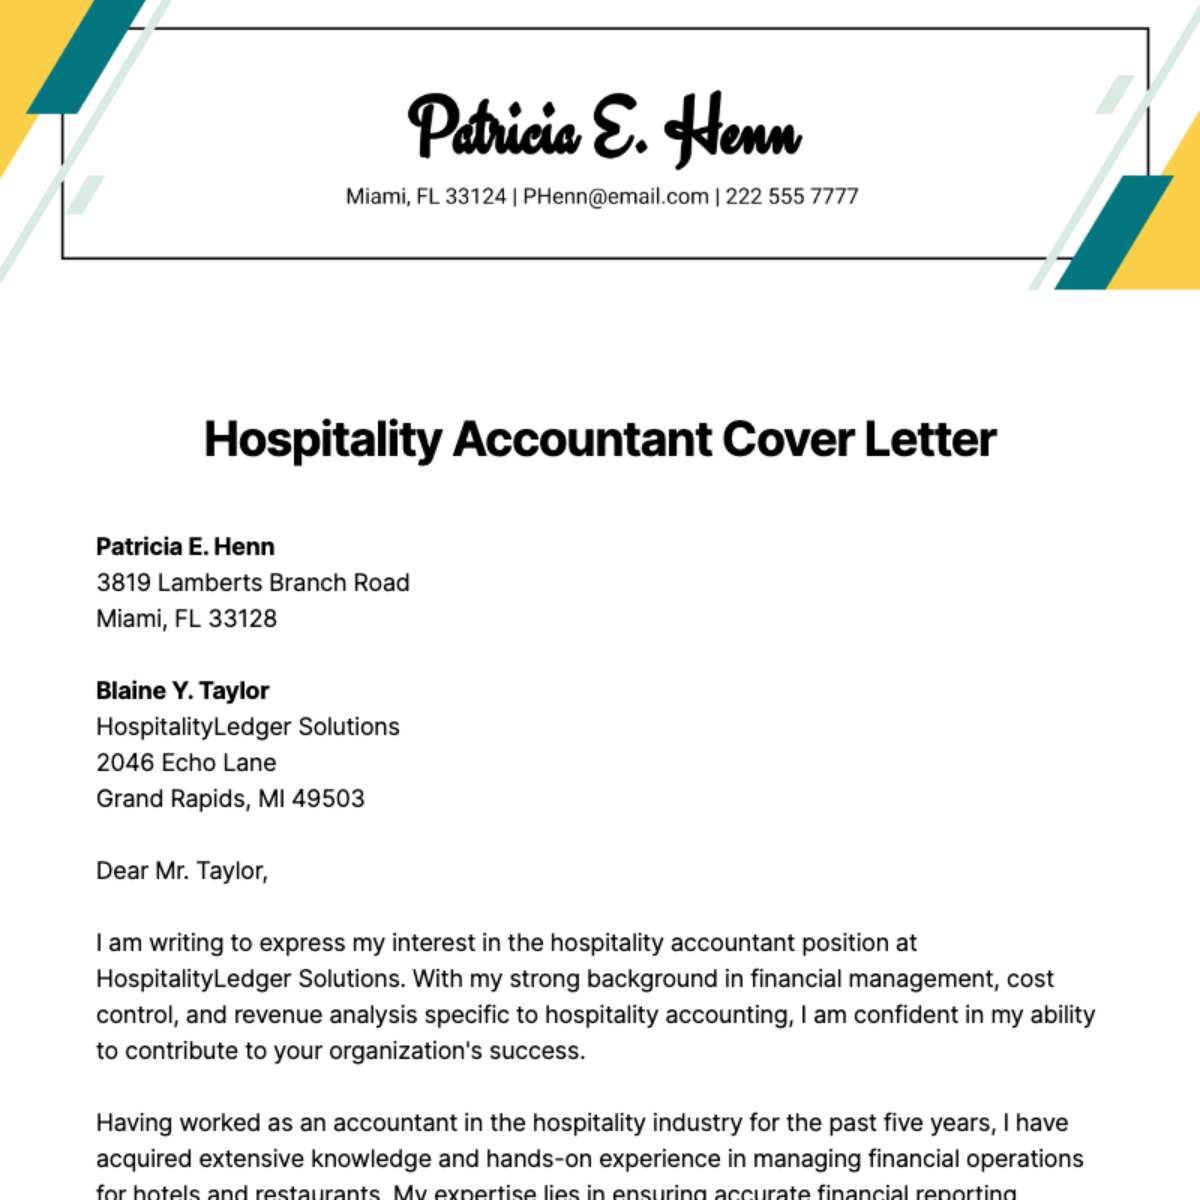 Hospitality Accountant Cover Letter Template